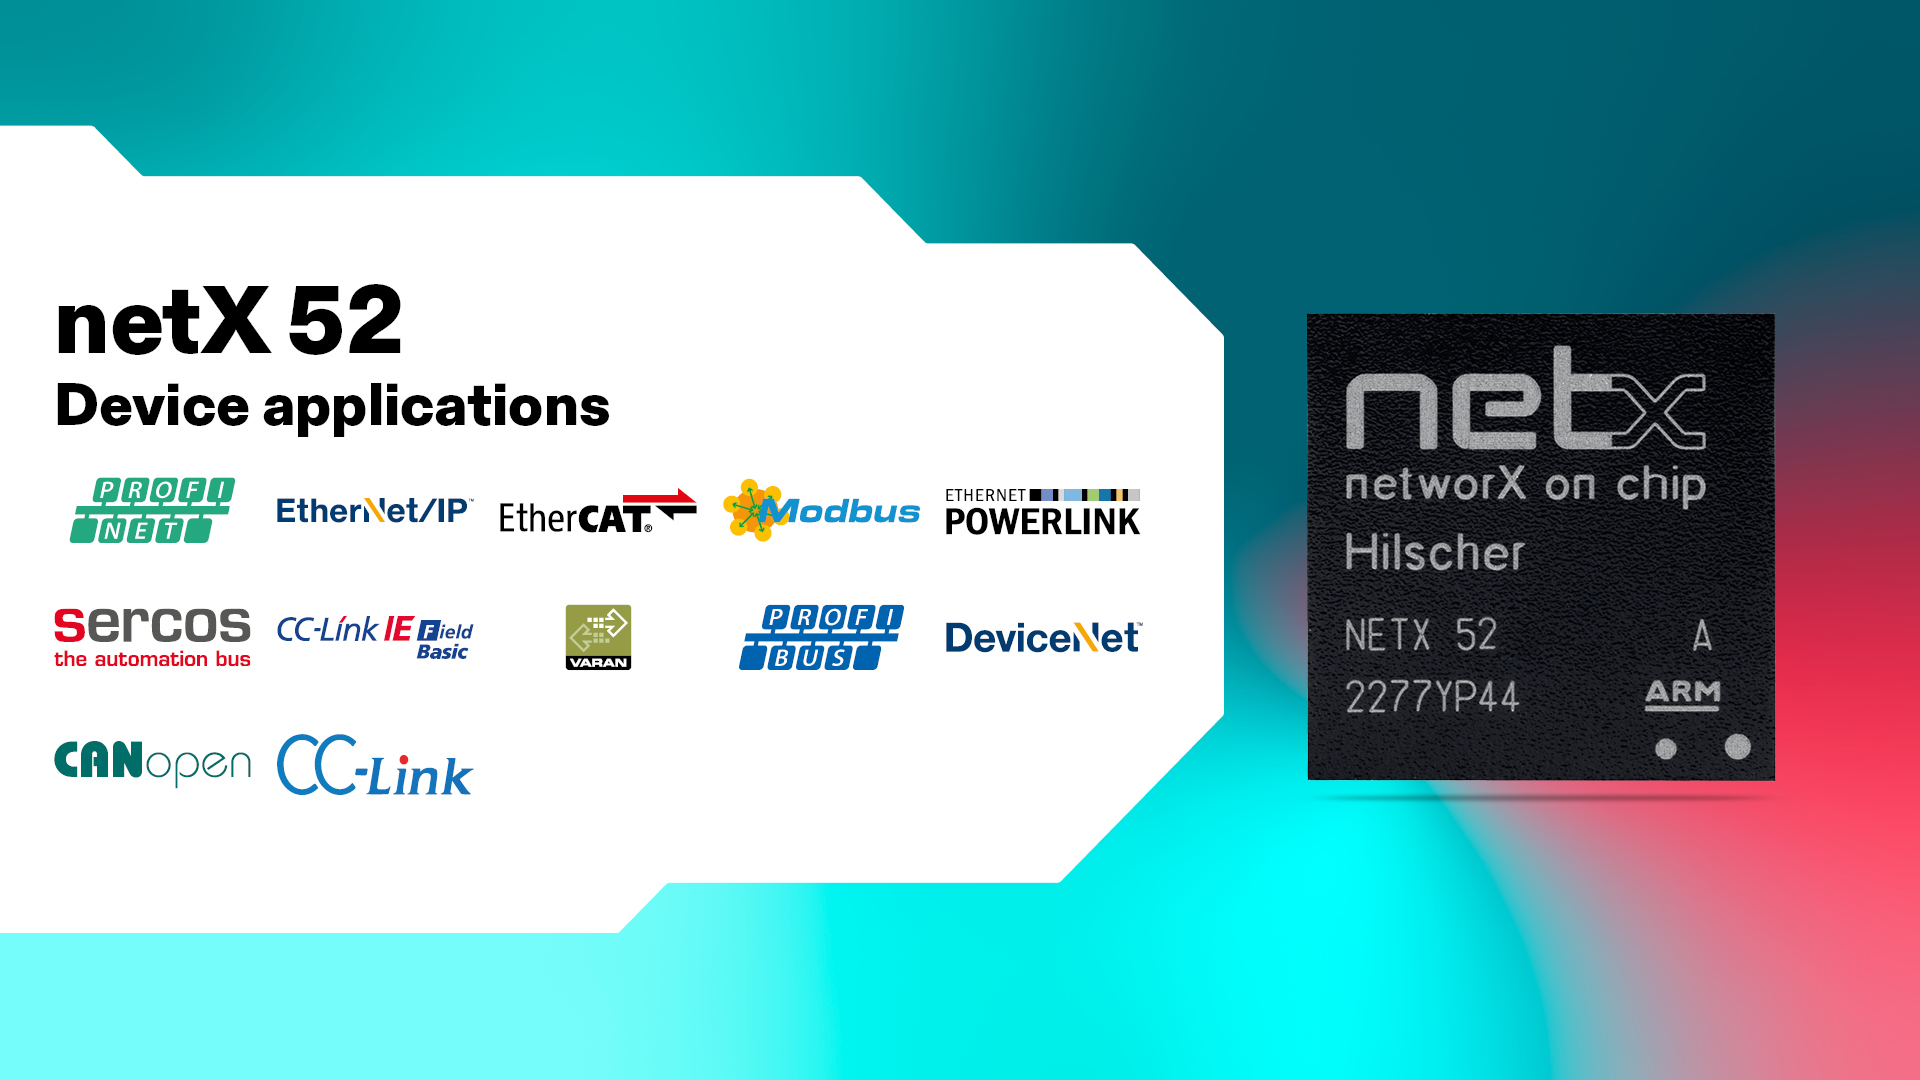 A netX 52 graphic in black on the right side on colorful background. Numerous protocol logos on a white background in an angular form on the left.